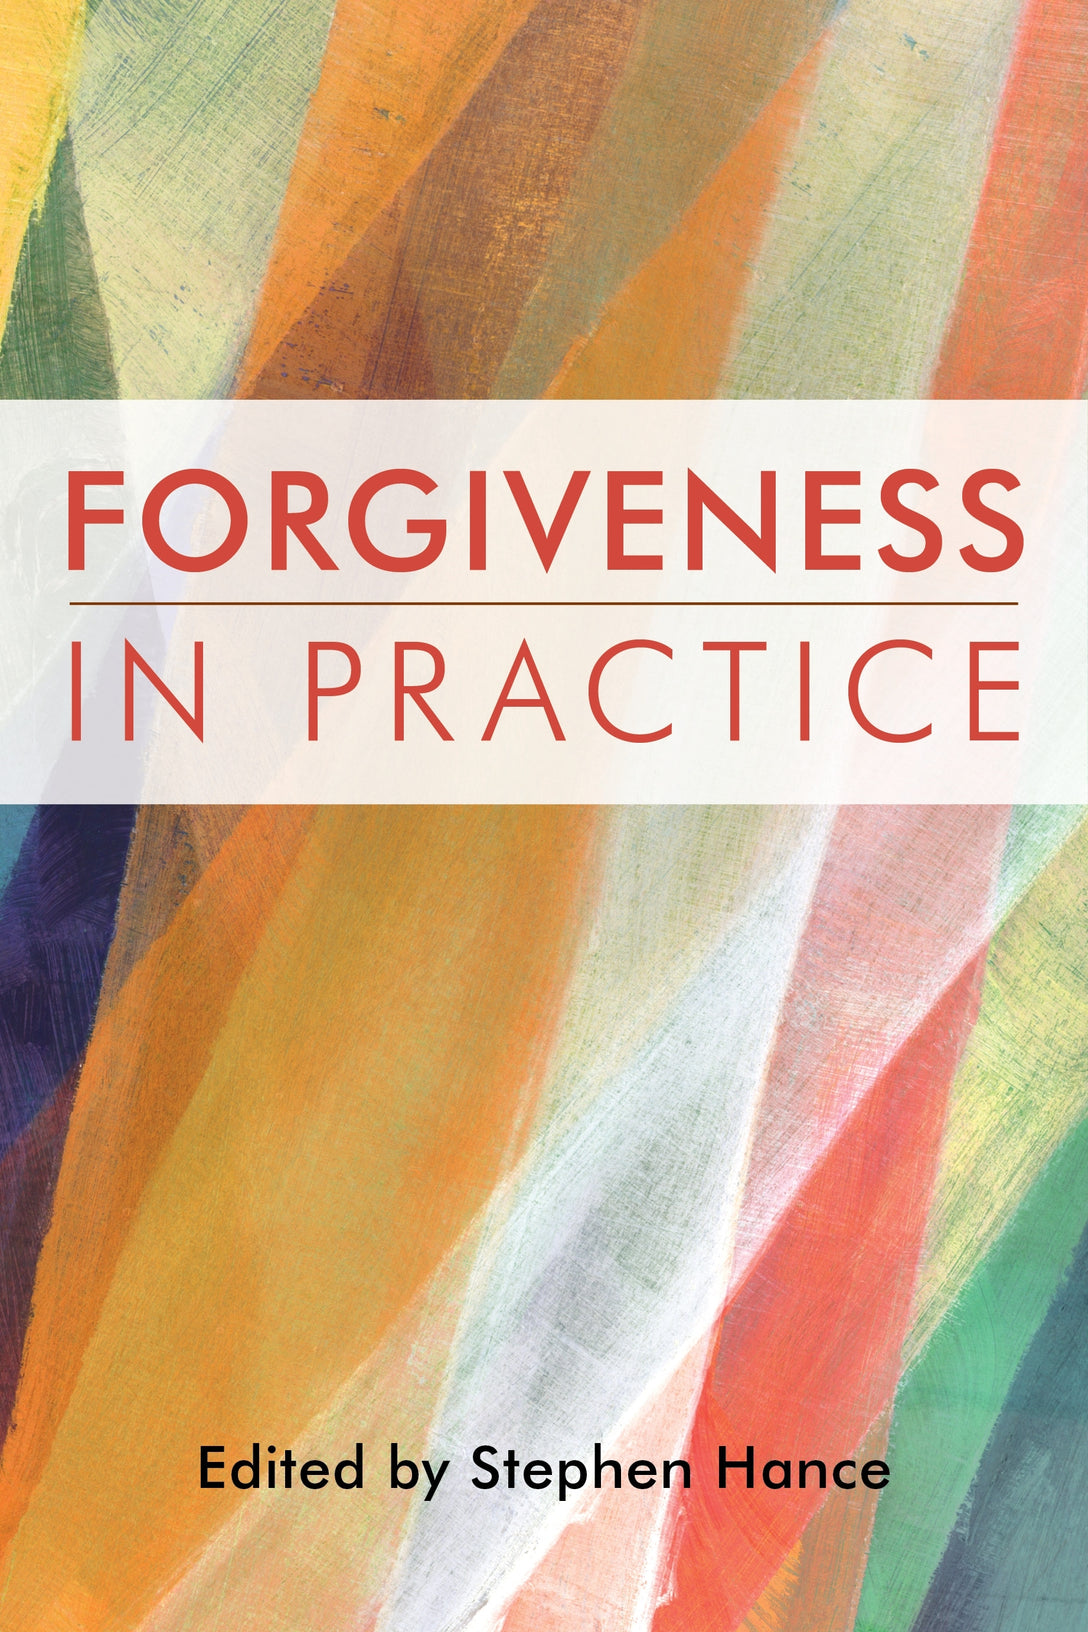 Forgiveness in Practice by Stephen Hance, No Author Listed